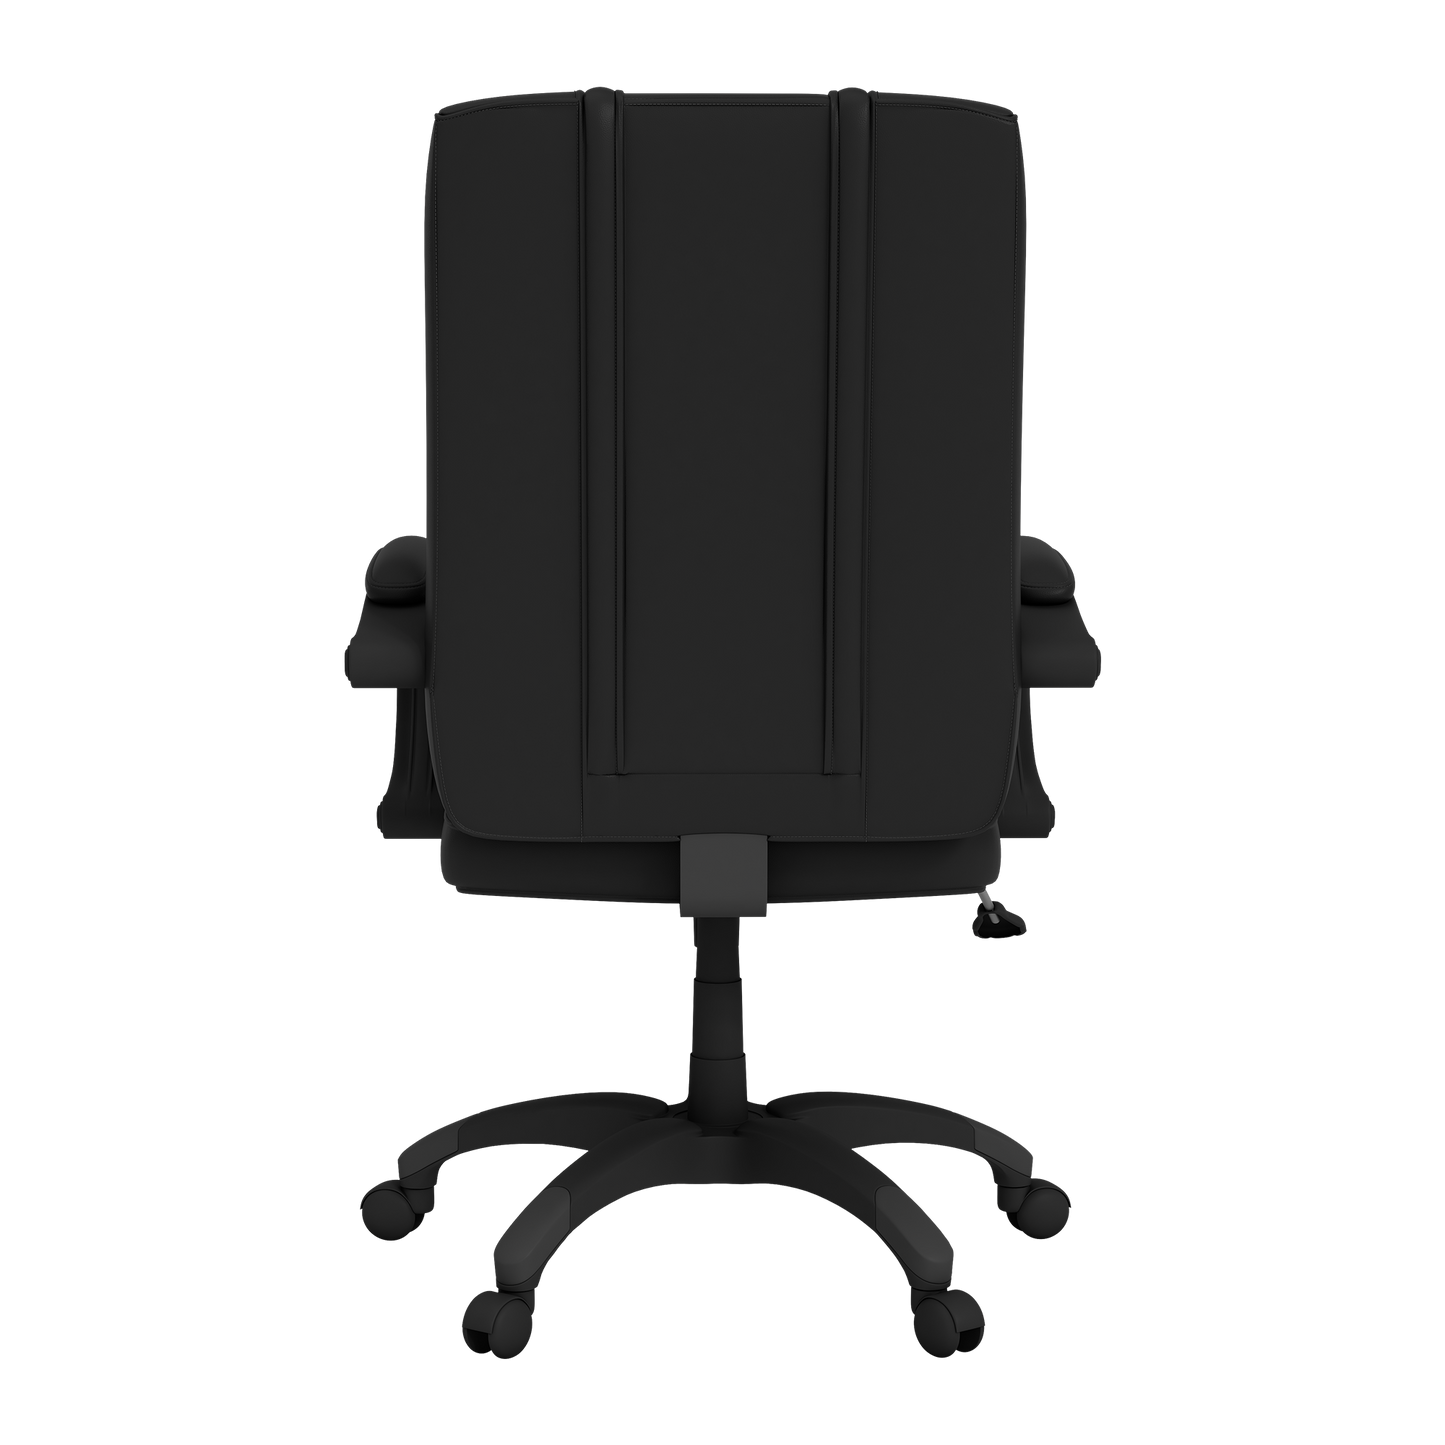 Office Chair 1000 with  Houston Texans Secondary Logo